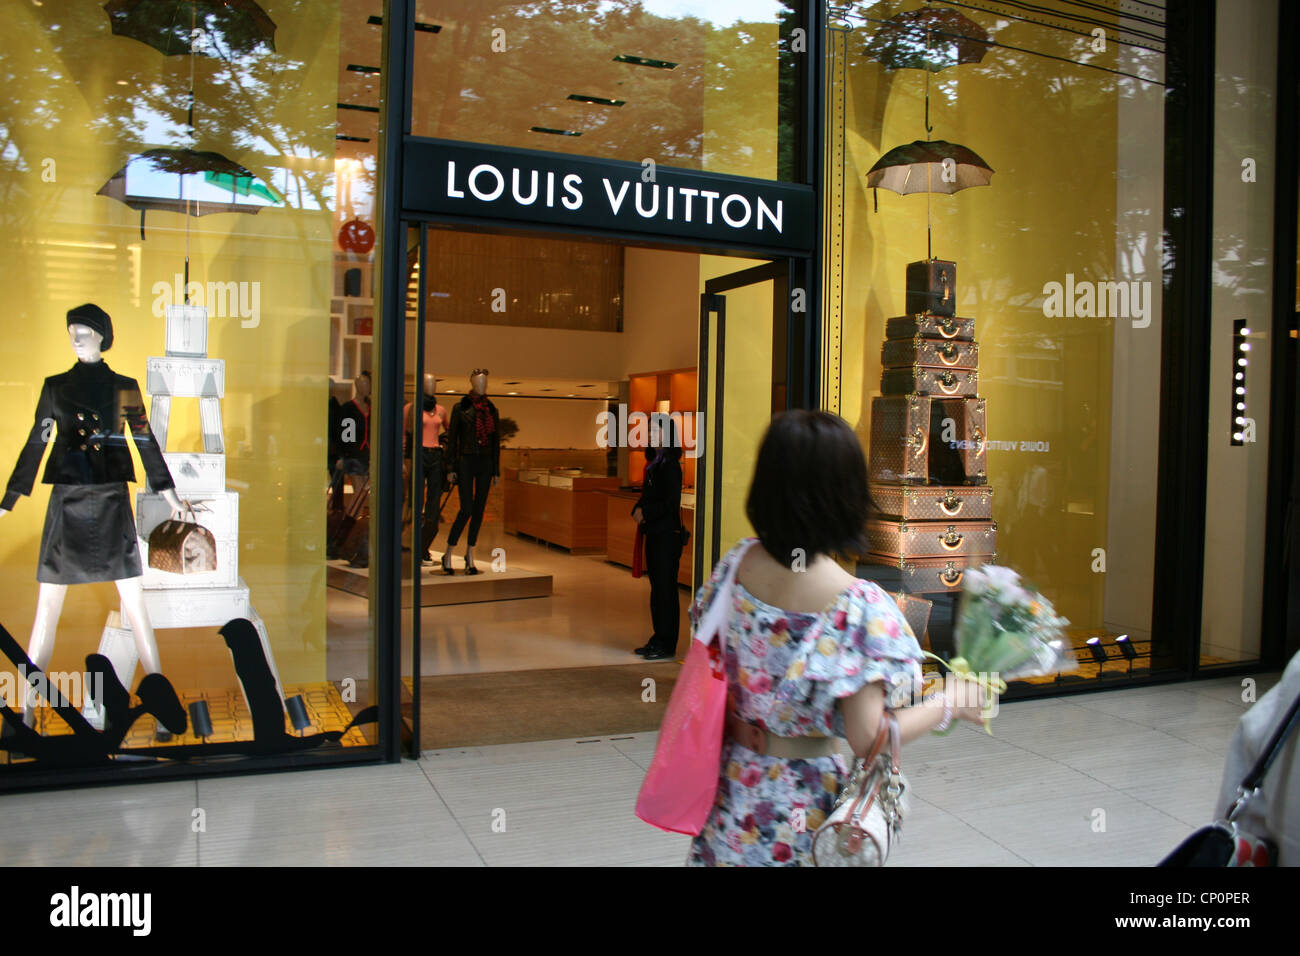 A woman walks by the Louis Vuitton shop and looks inside, Tokyo Japan ...